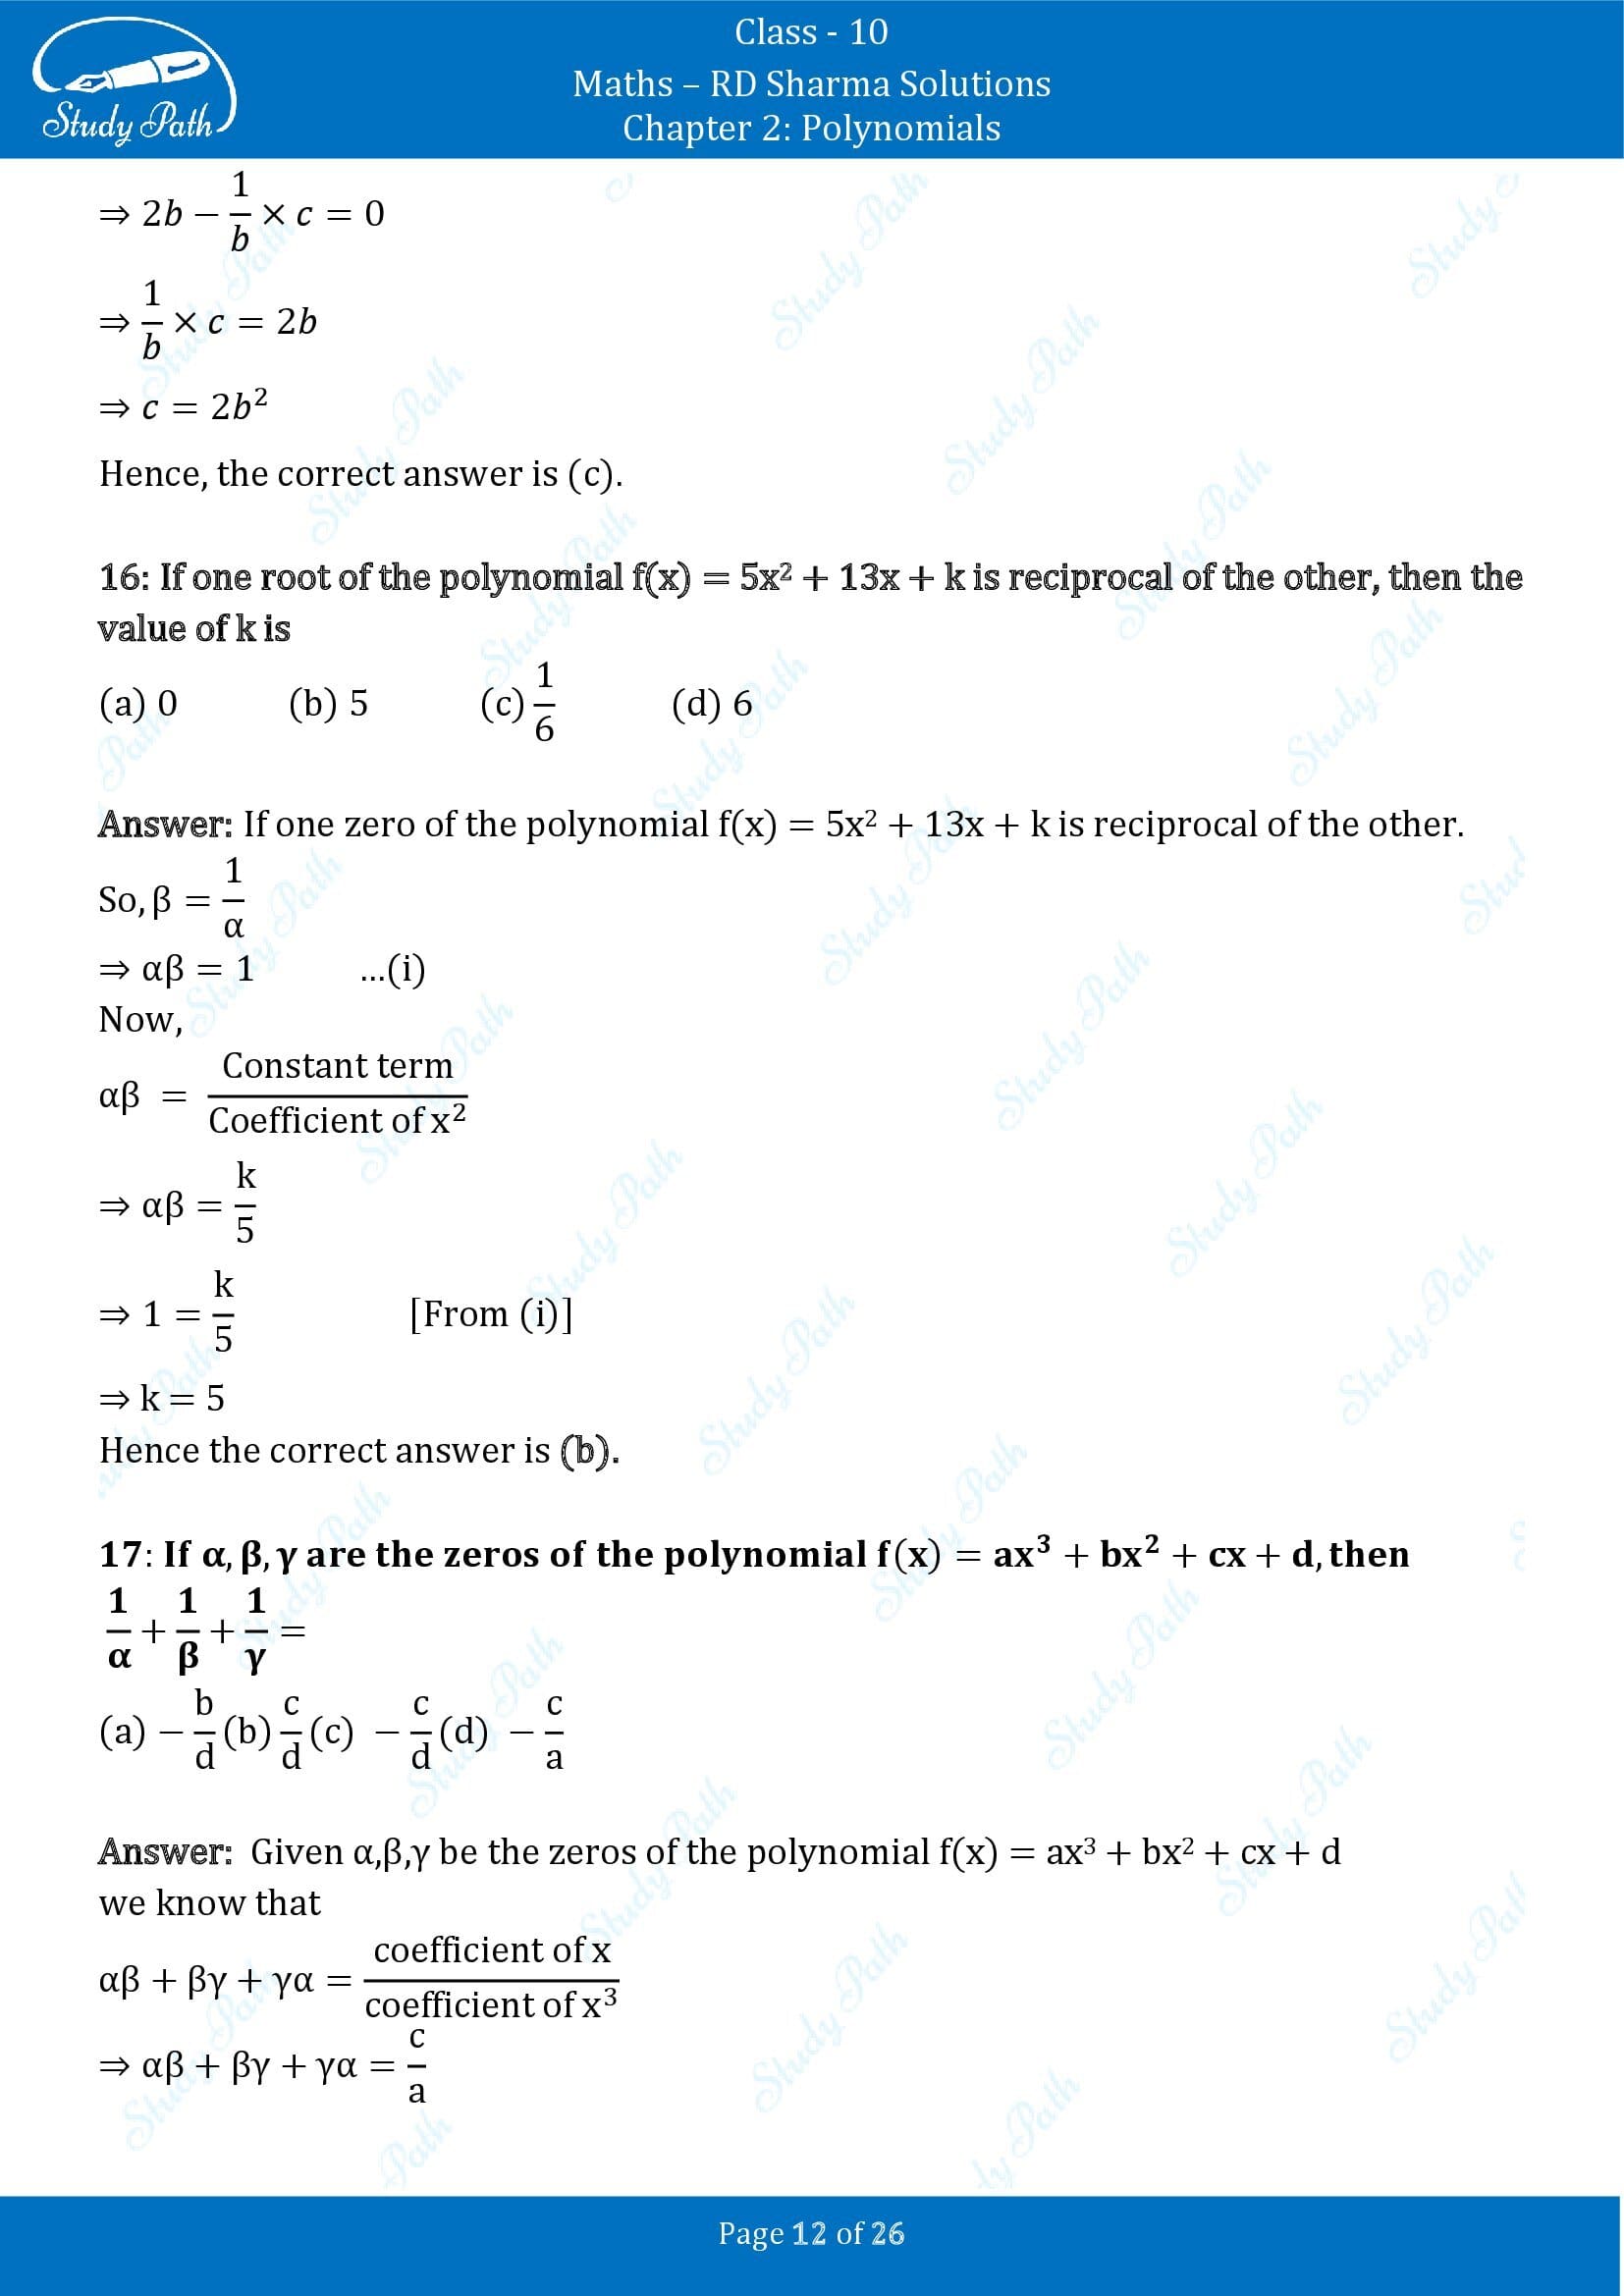 RD Sharma Solutions Class 10 Chapter 2 Polynomials Multiple Choice Questions MCQs 00012